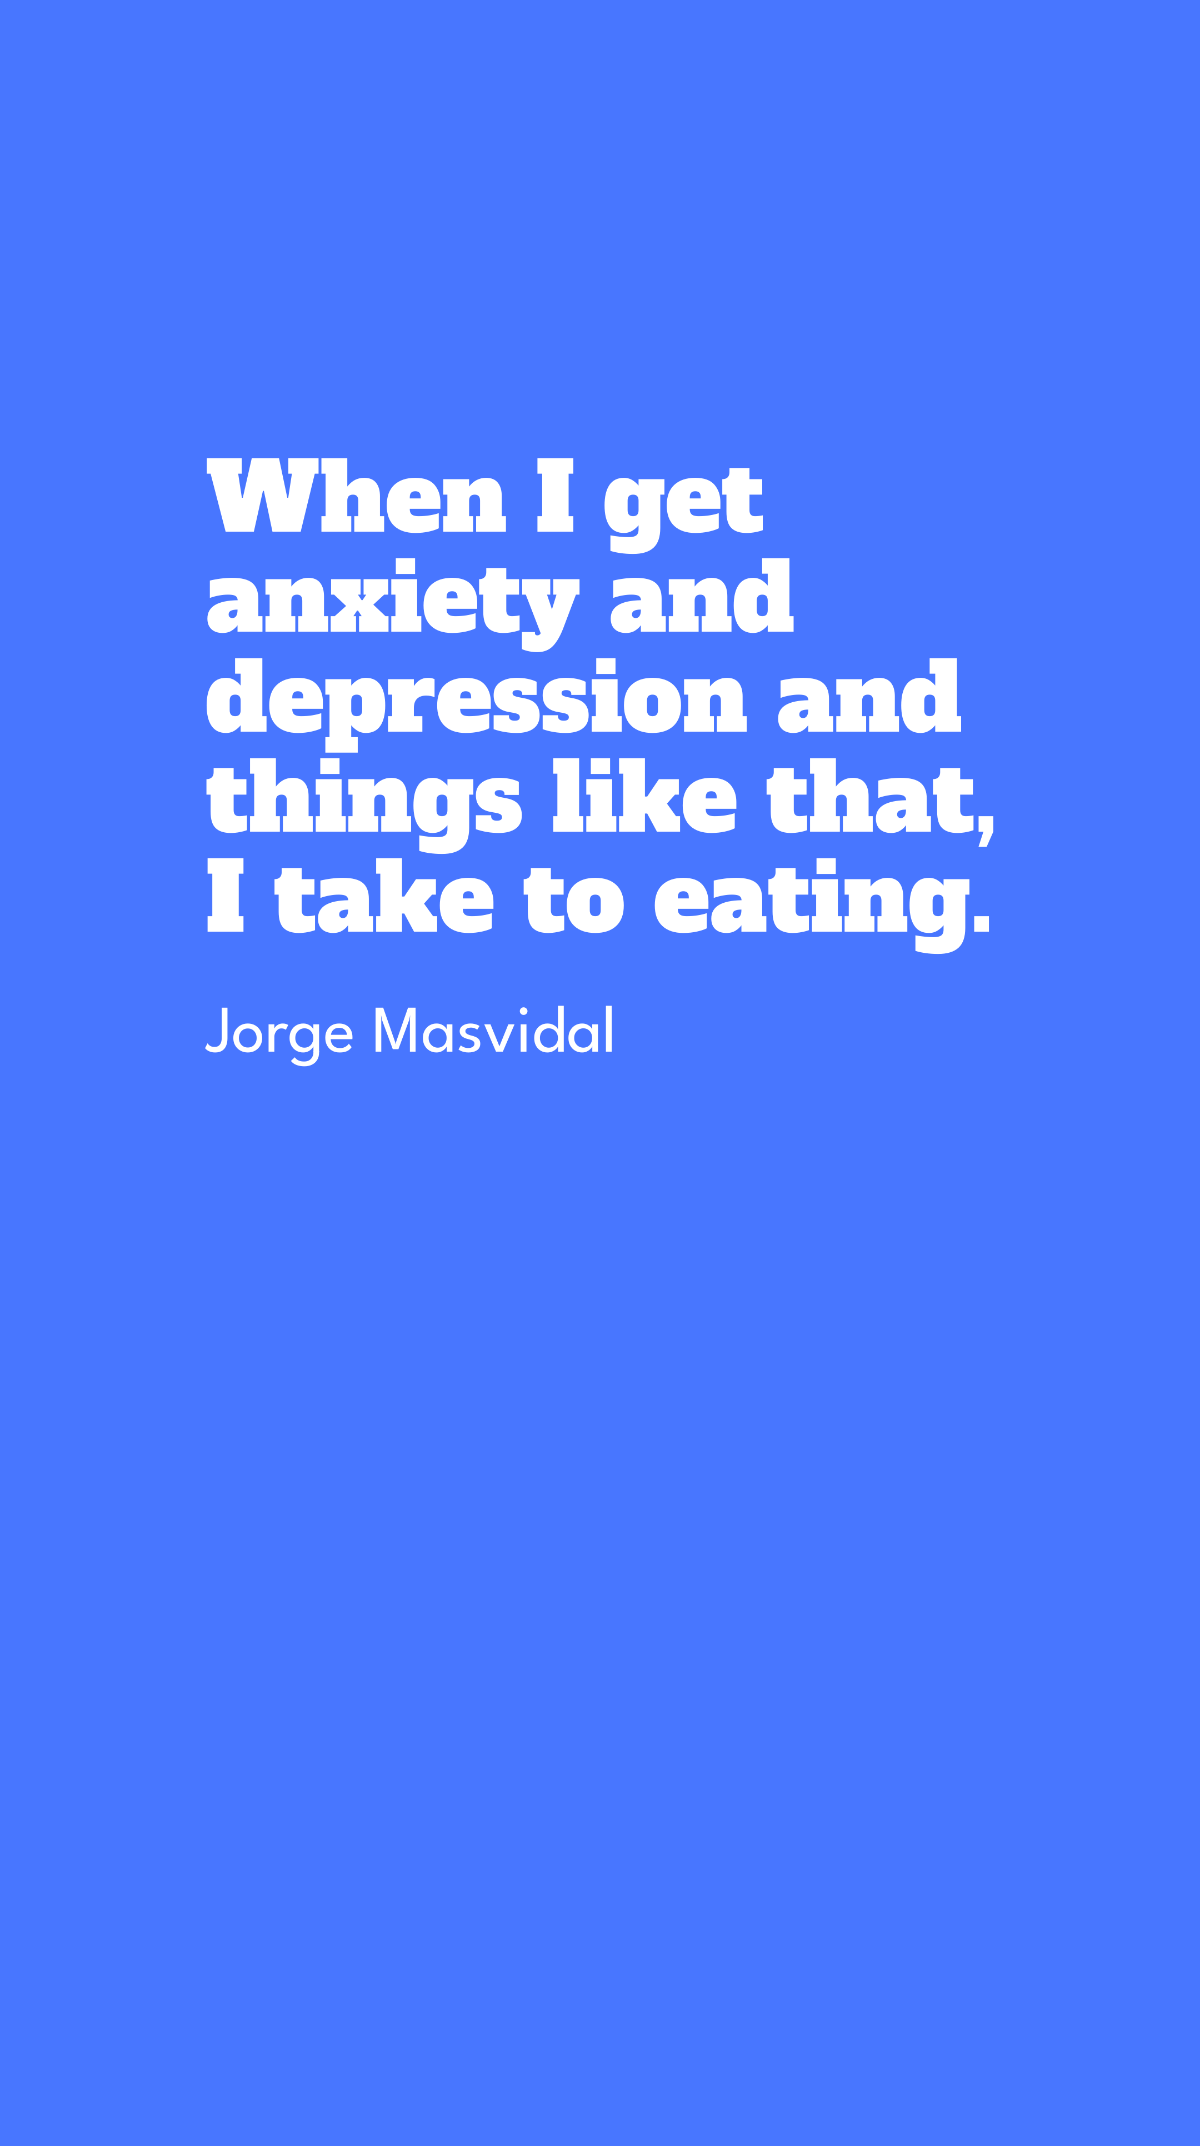 Jorge Masvidal - When I get anxiety and depression and things like that, I take to eating.